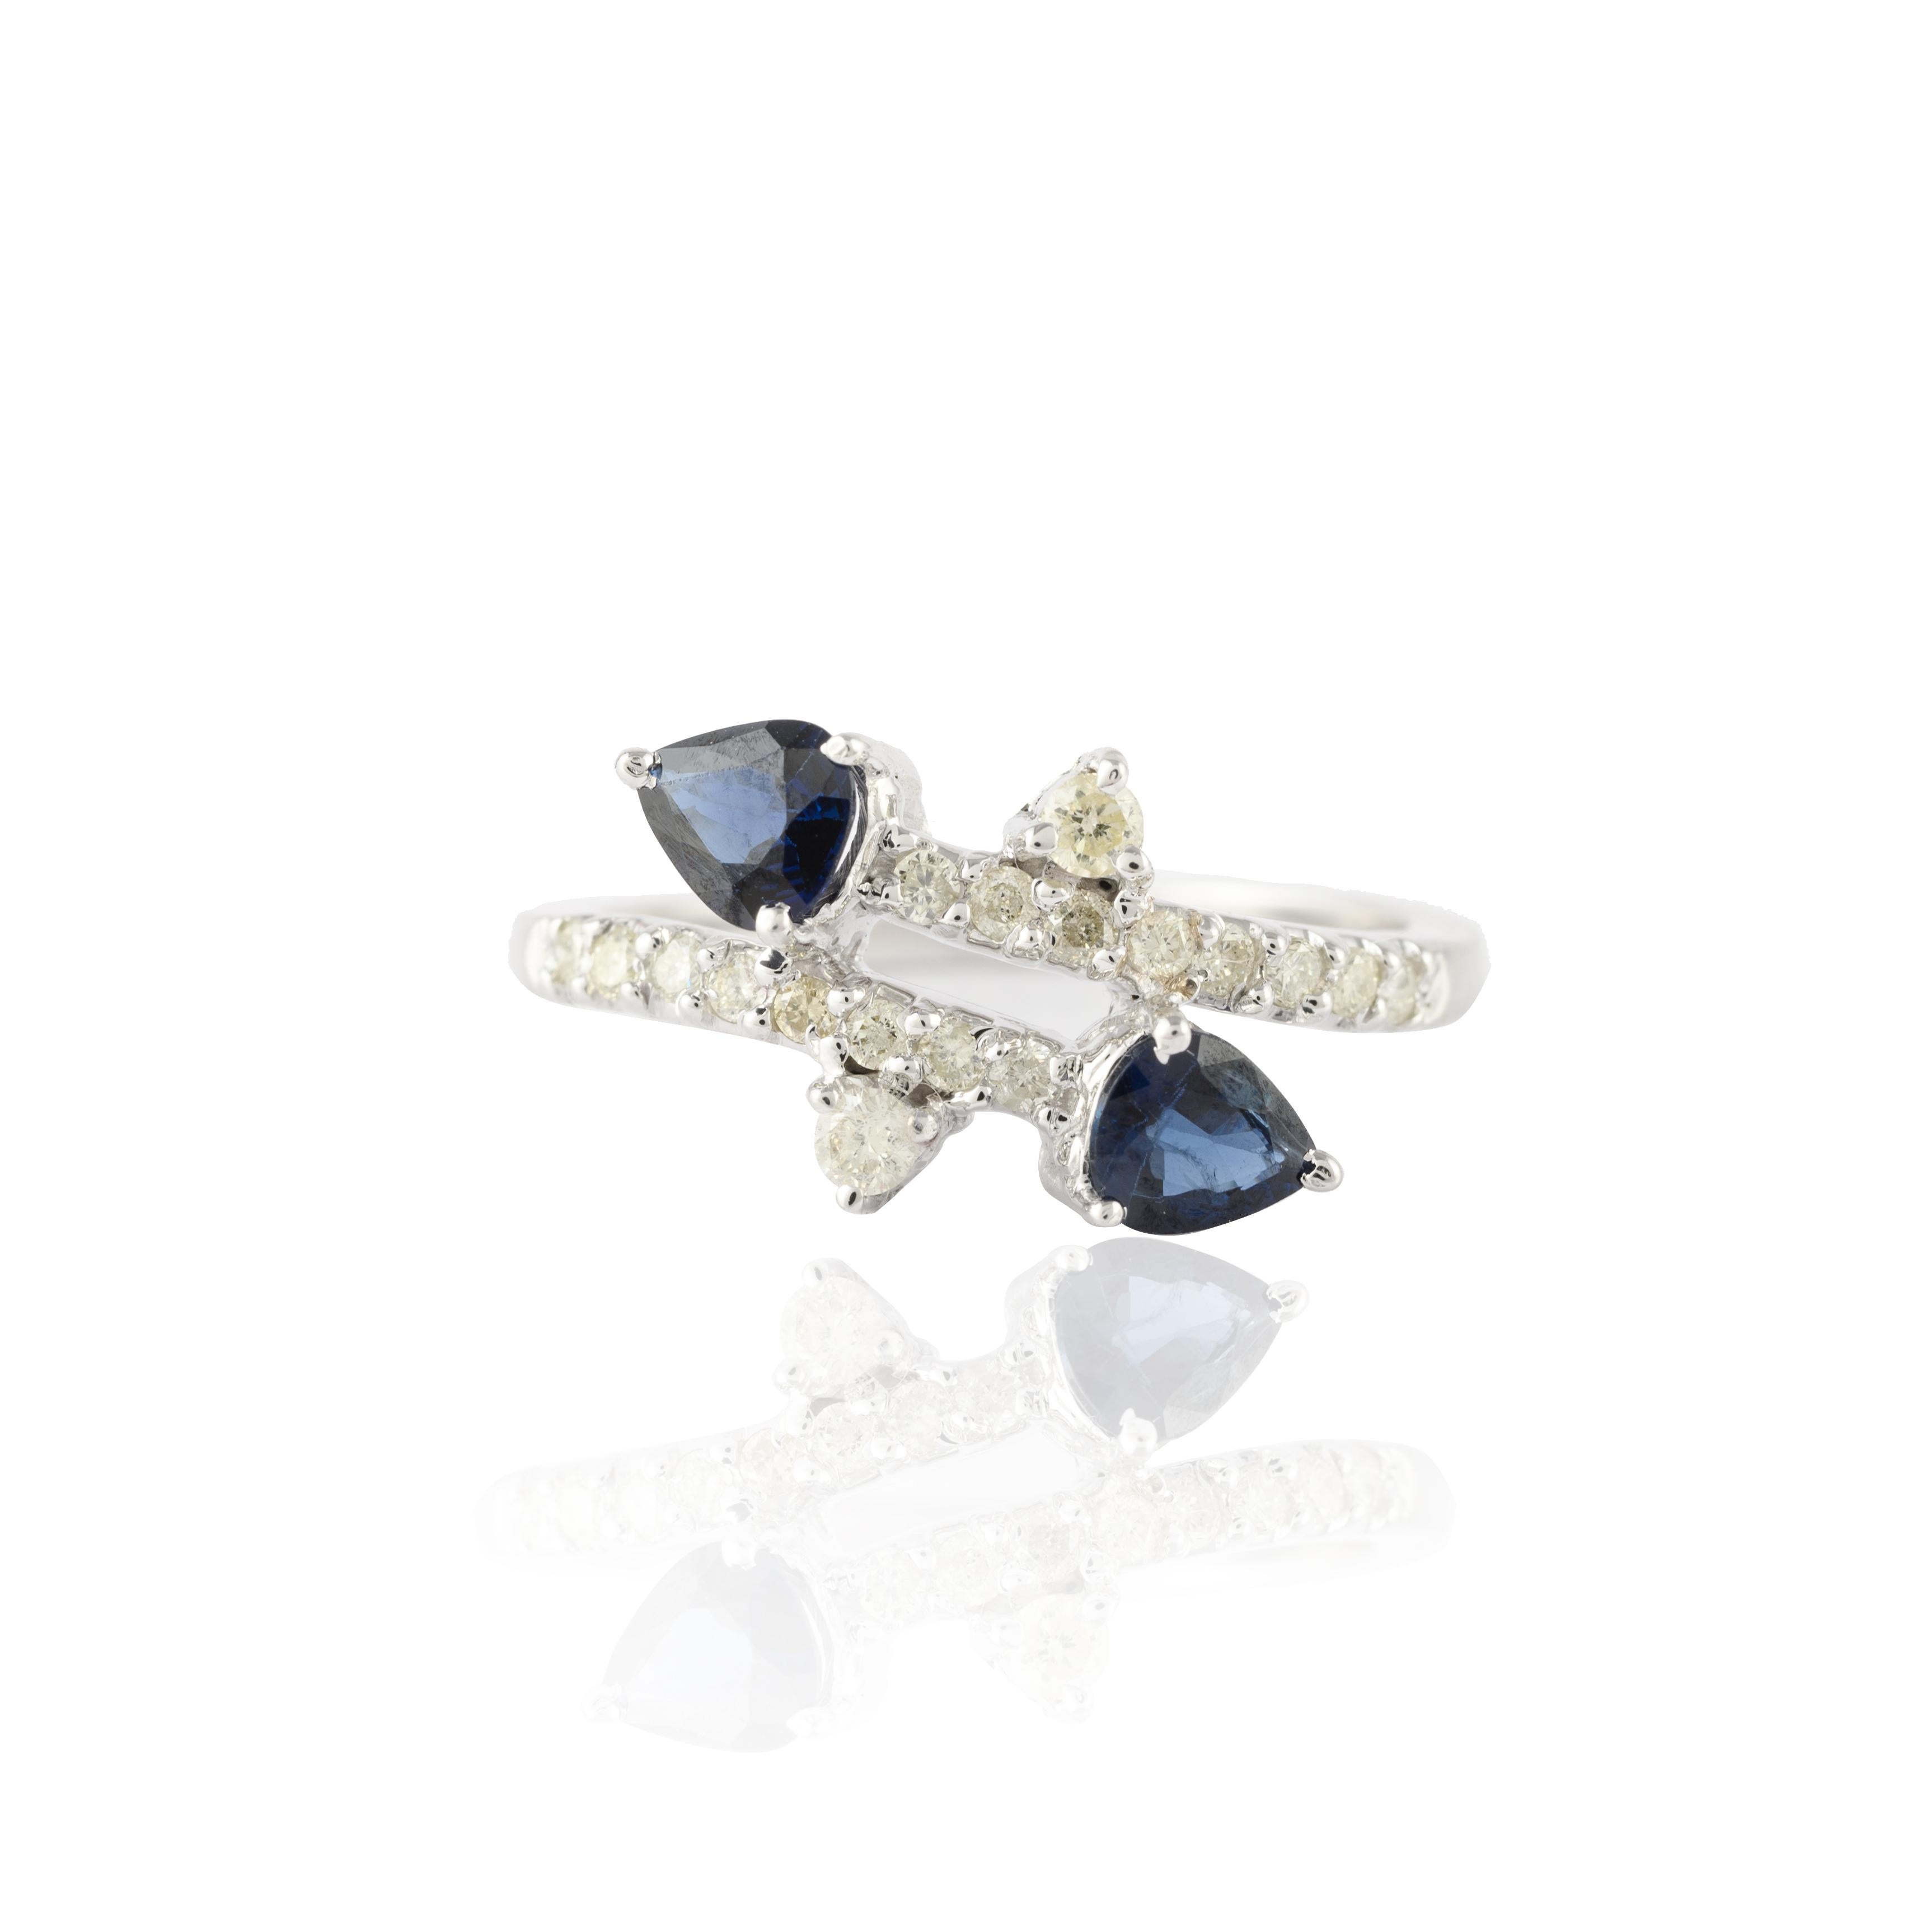 For Sale:  Minimalist Blue Sapphire Diamond Ring in 14K Solid White Gold  2